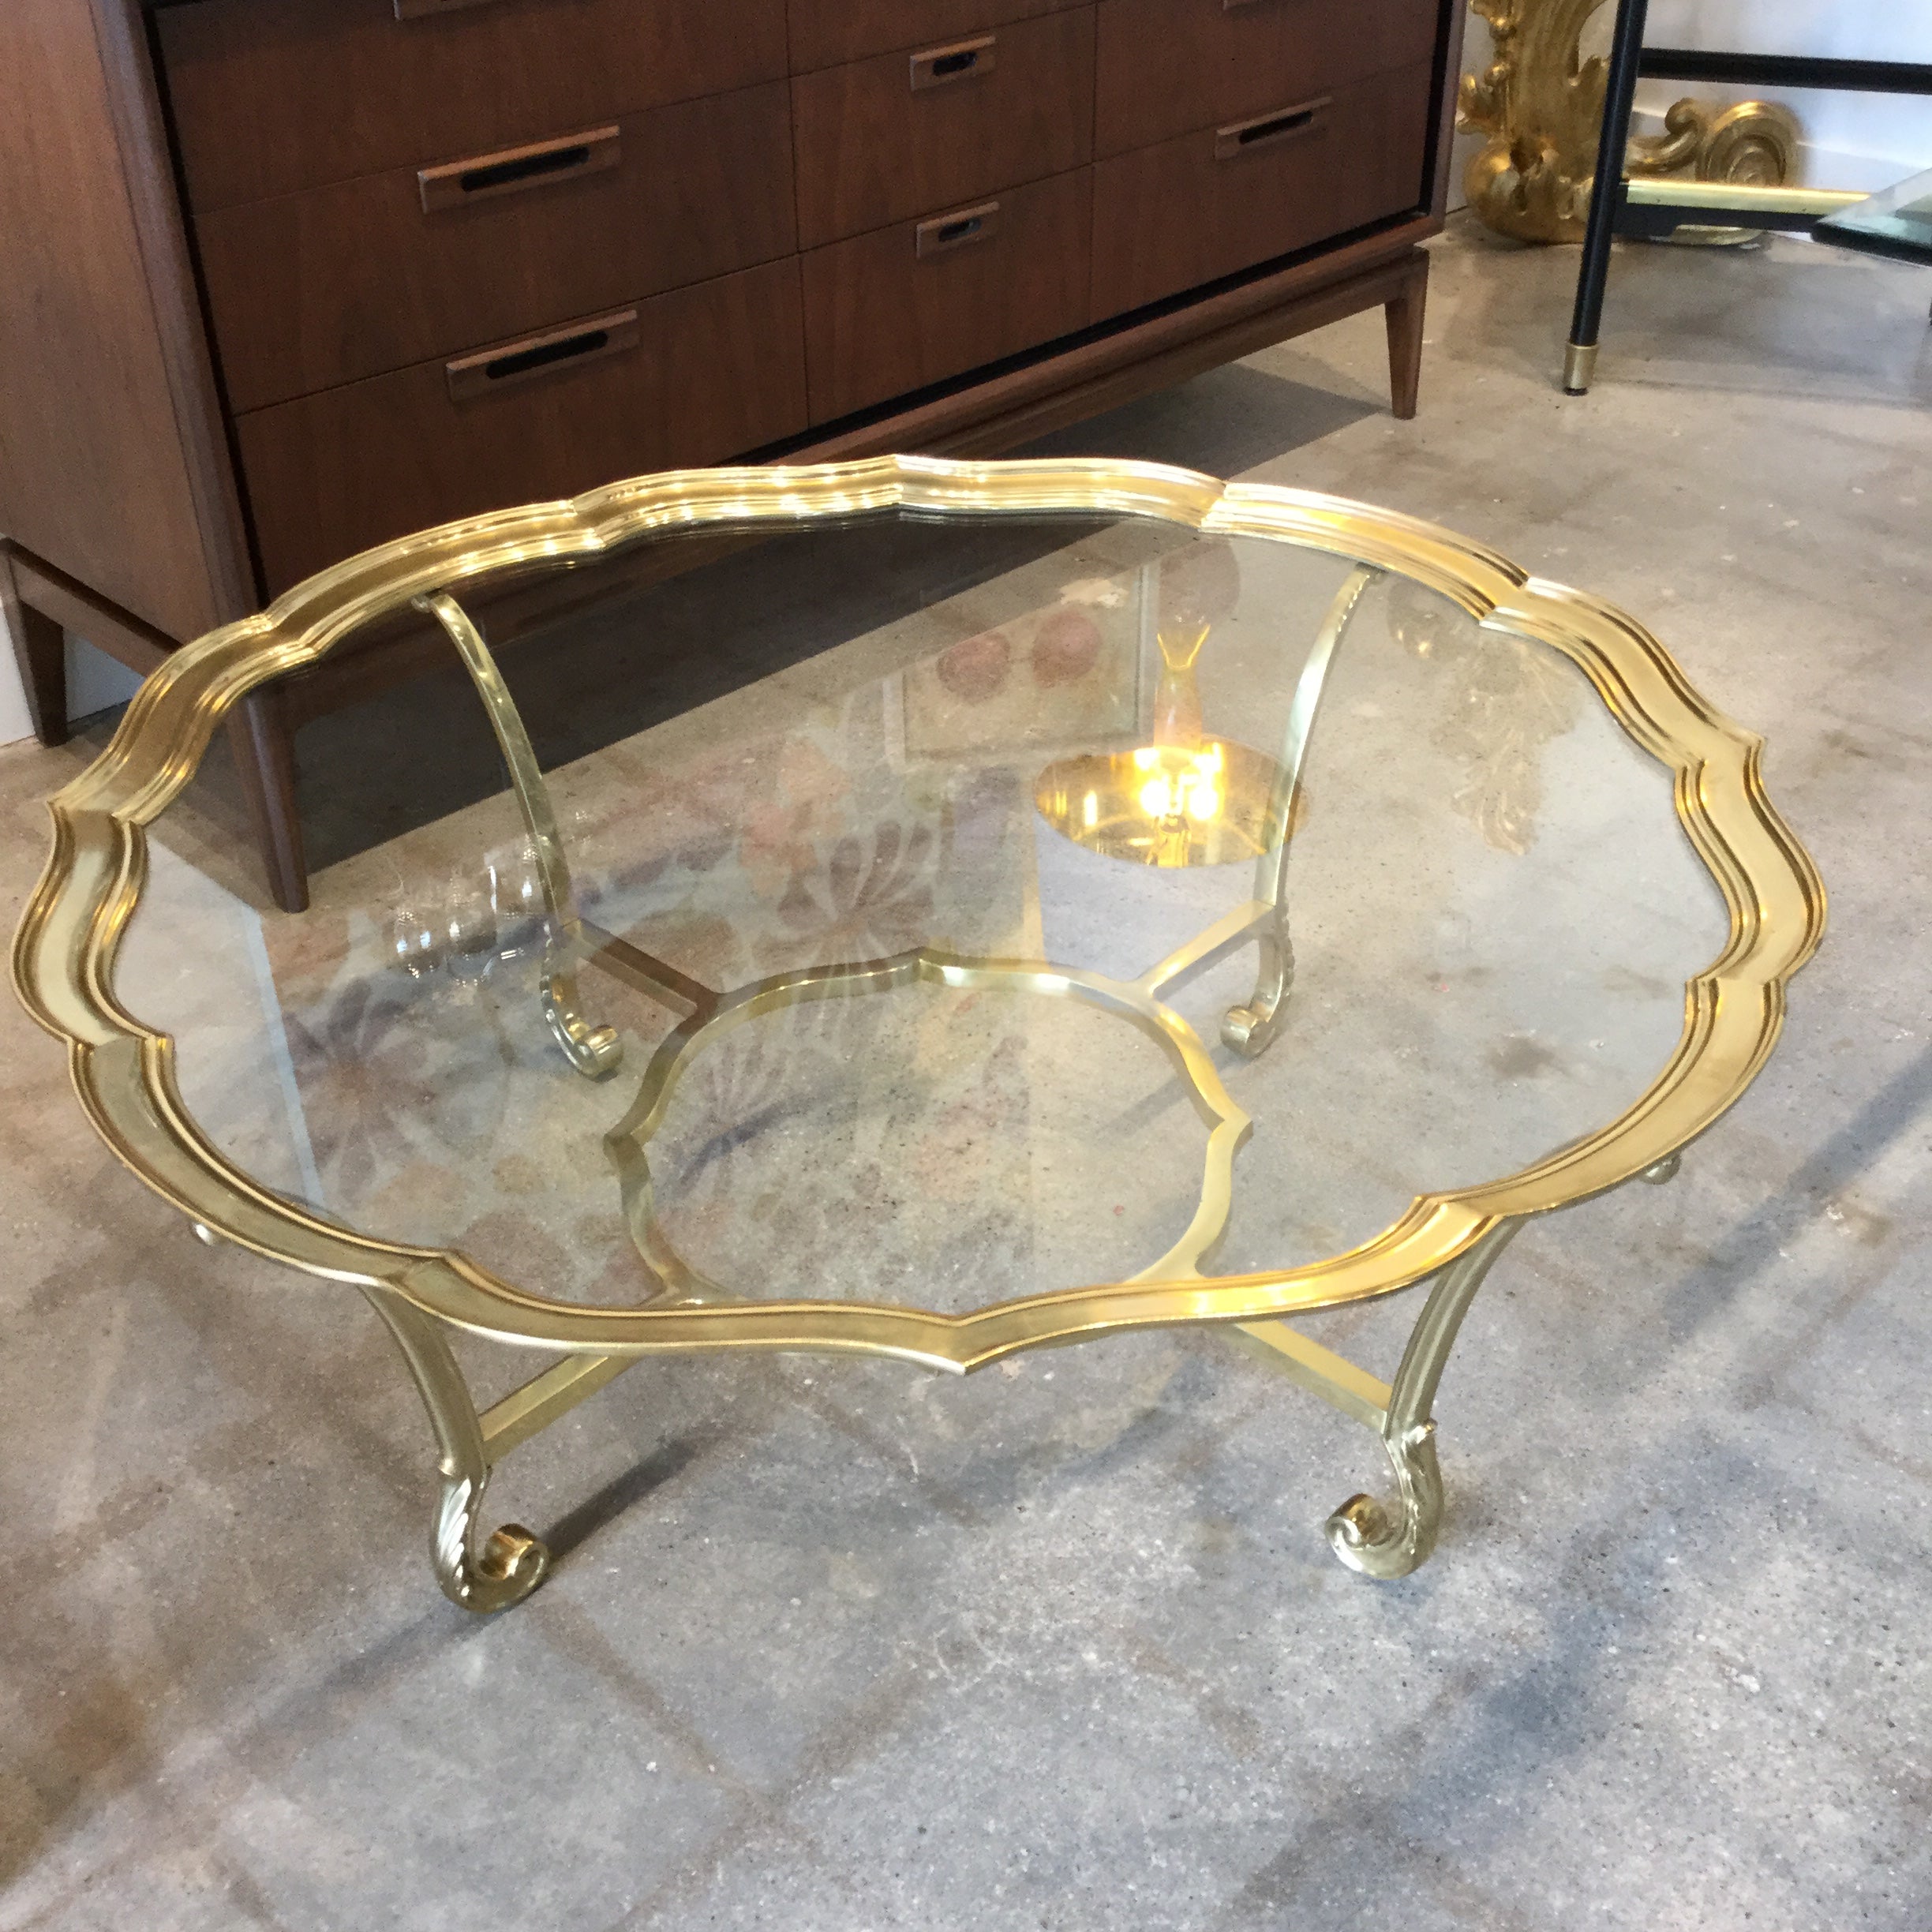 Vintage La Barge Scalloped Brass and Glass Coffee Table - Park + Eighth